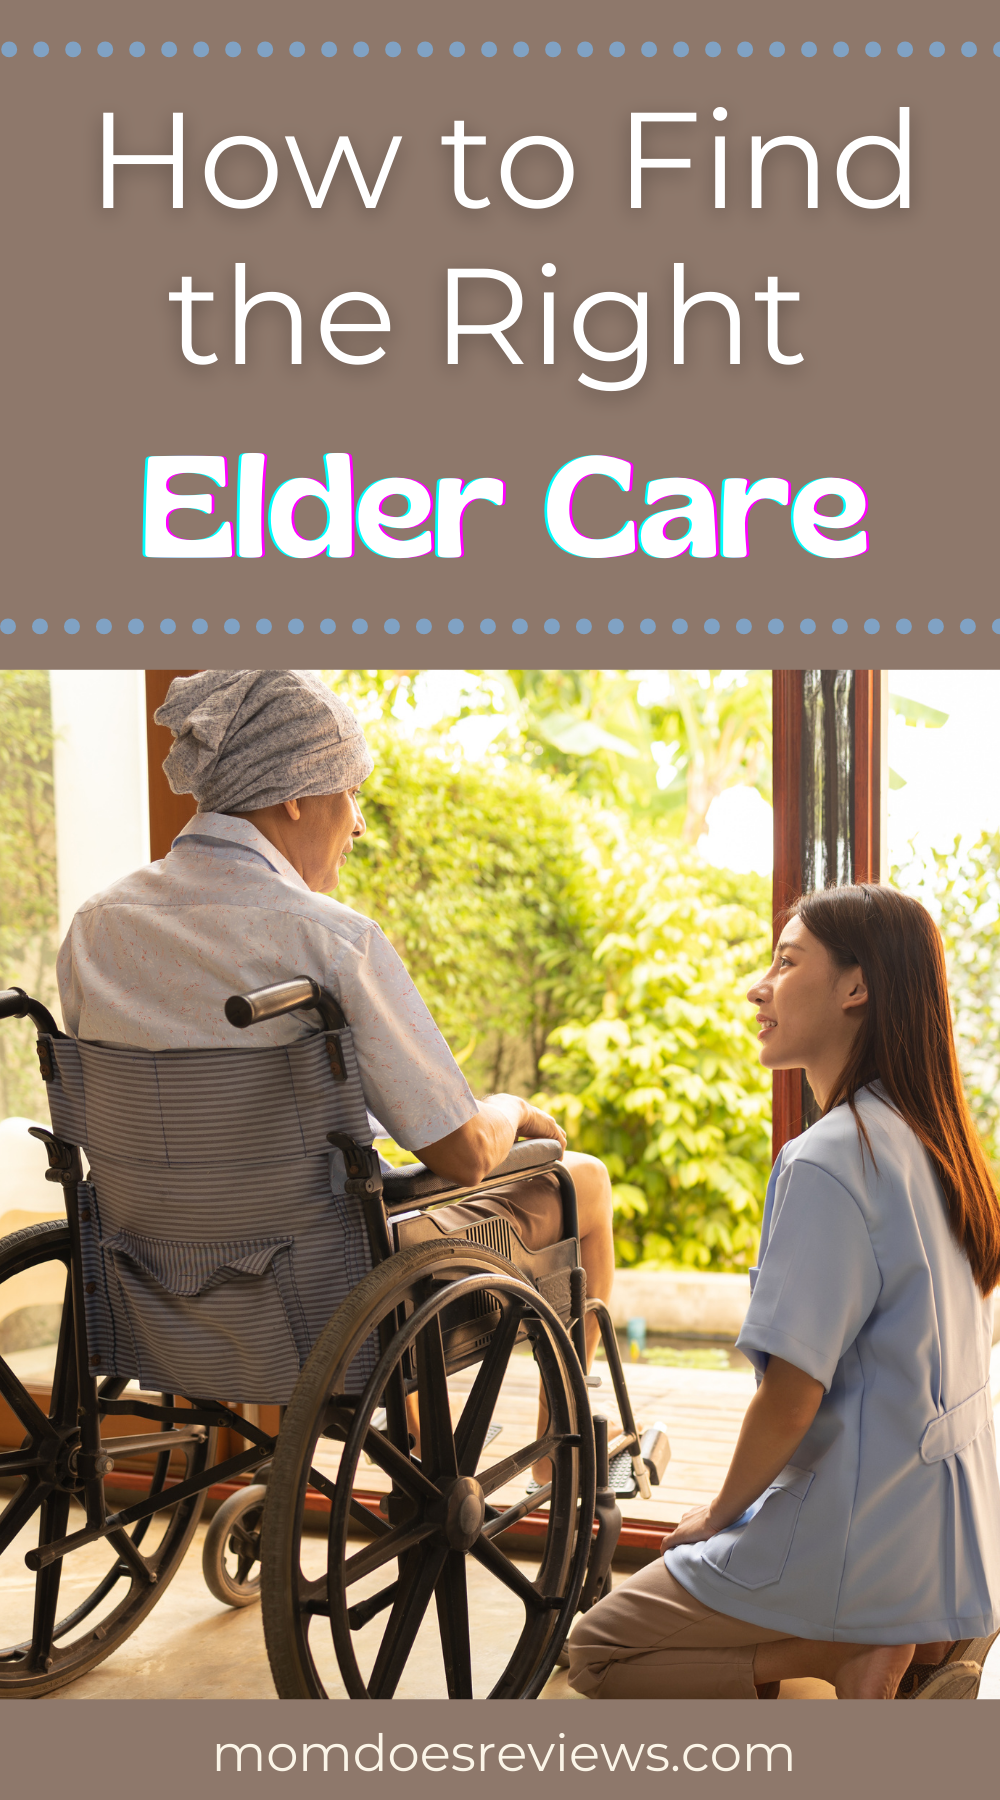 How to Find the Right Elderly Care for Your Family